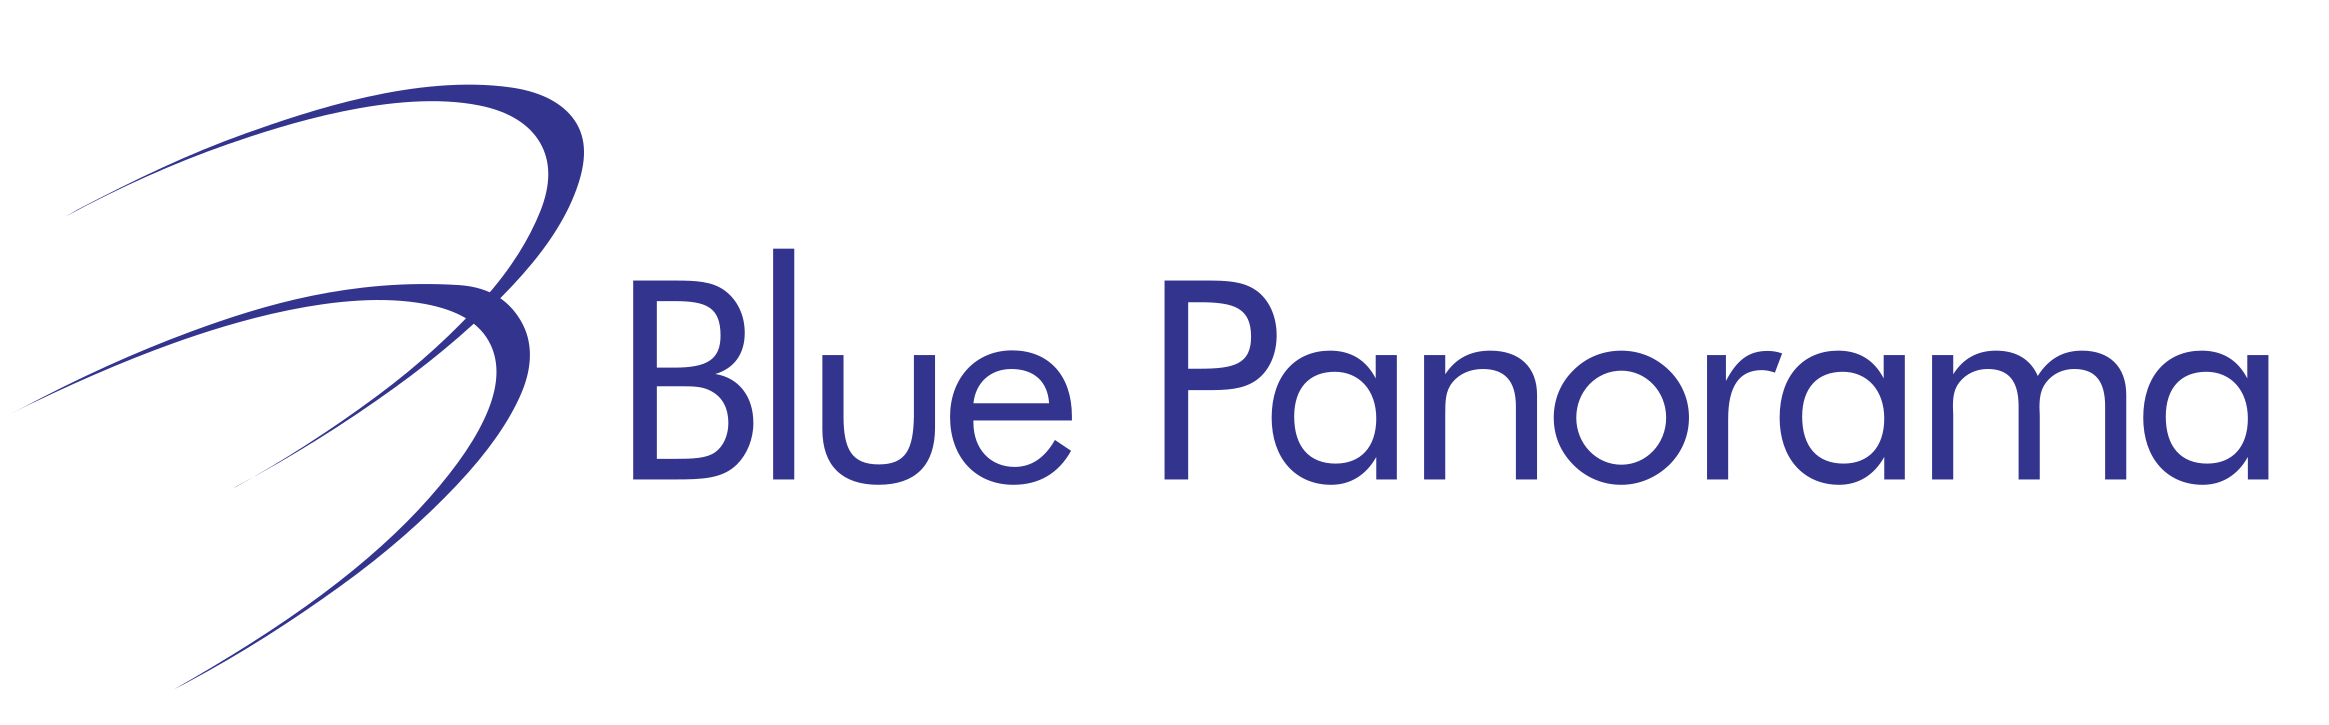 Blue Panorama Coupons & Promo Codes